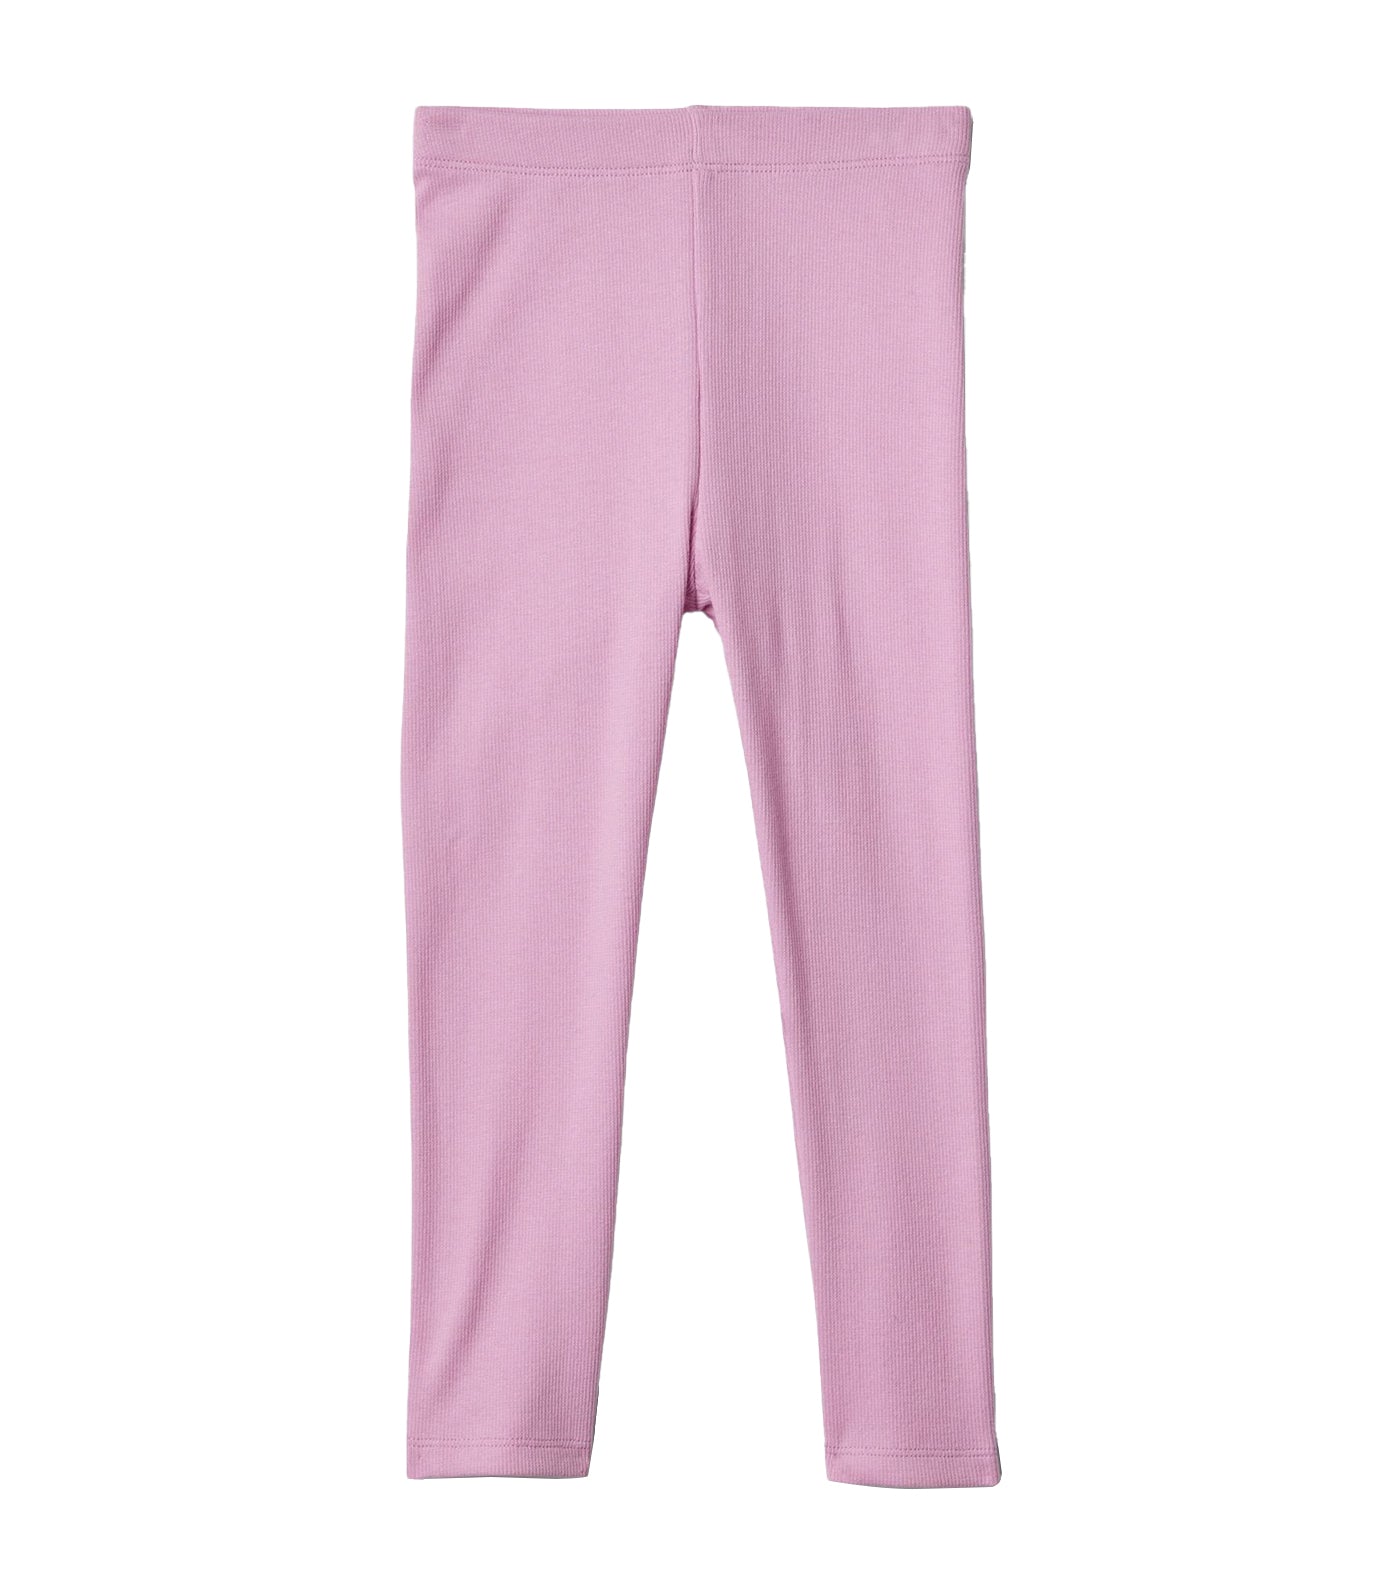 Toddler Mix and Match Pull-On Leggings - Sugar Pink